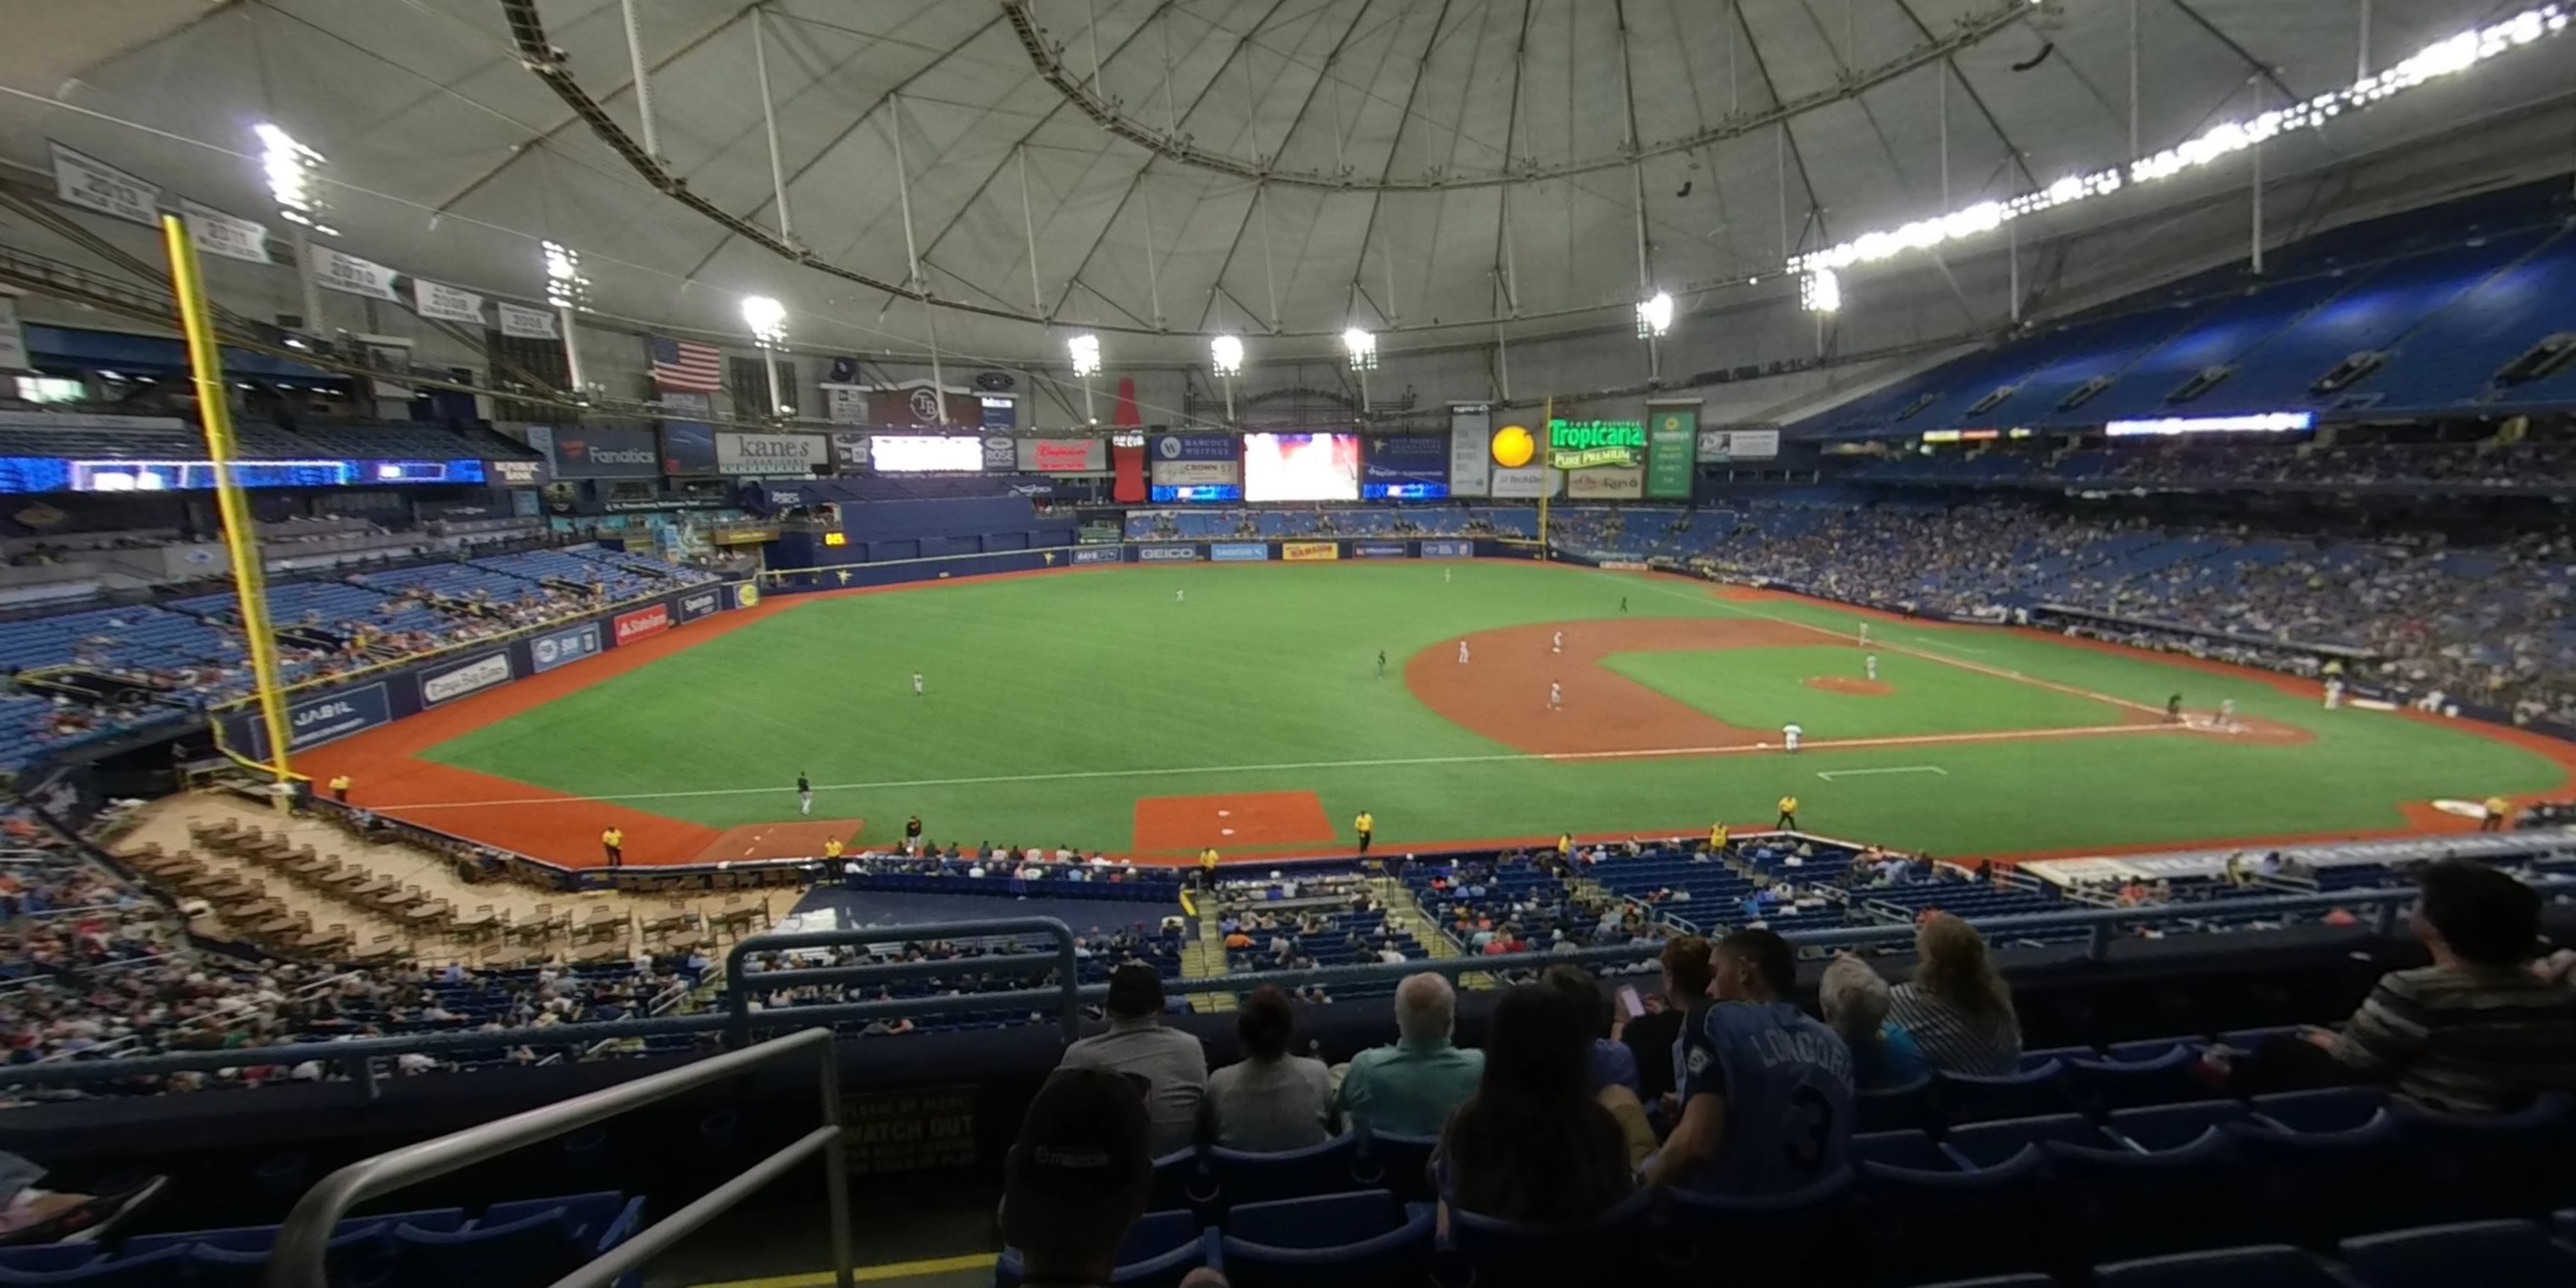 section 217 panoramic seat view  for baseball - tropicana field